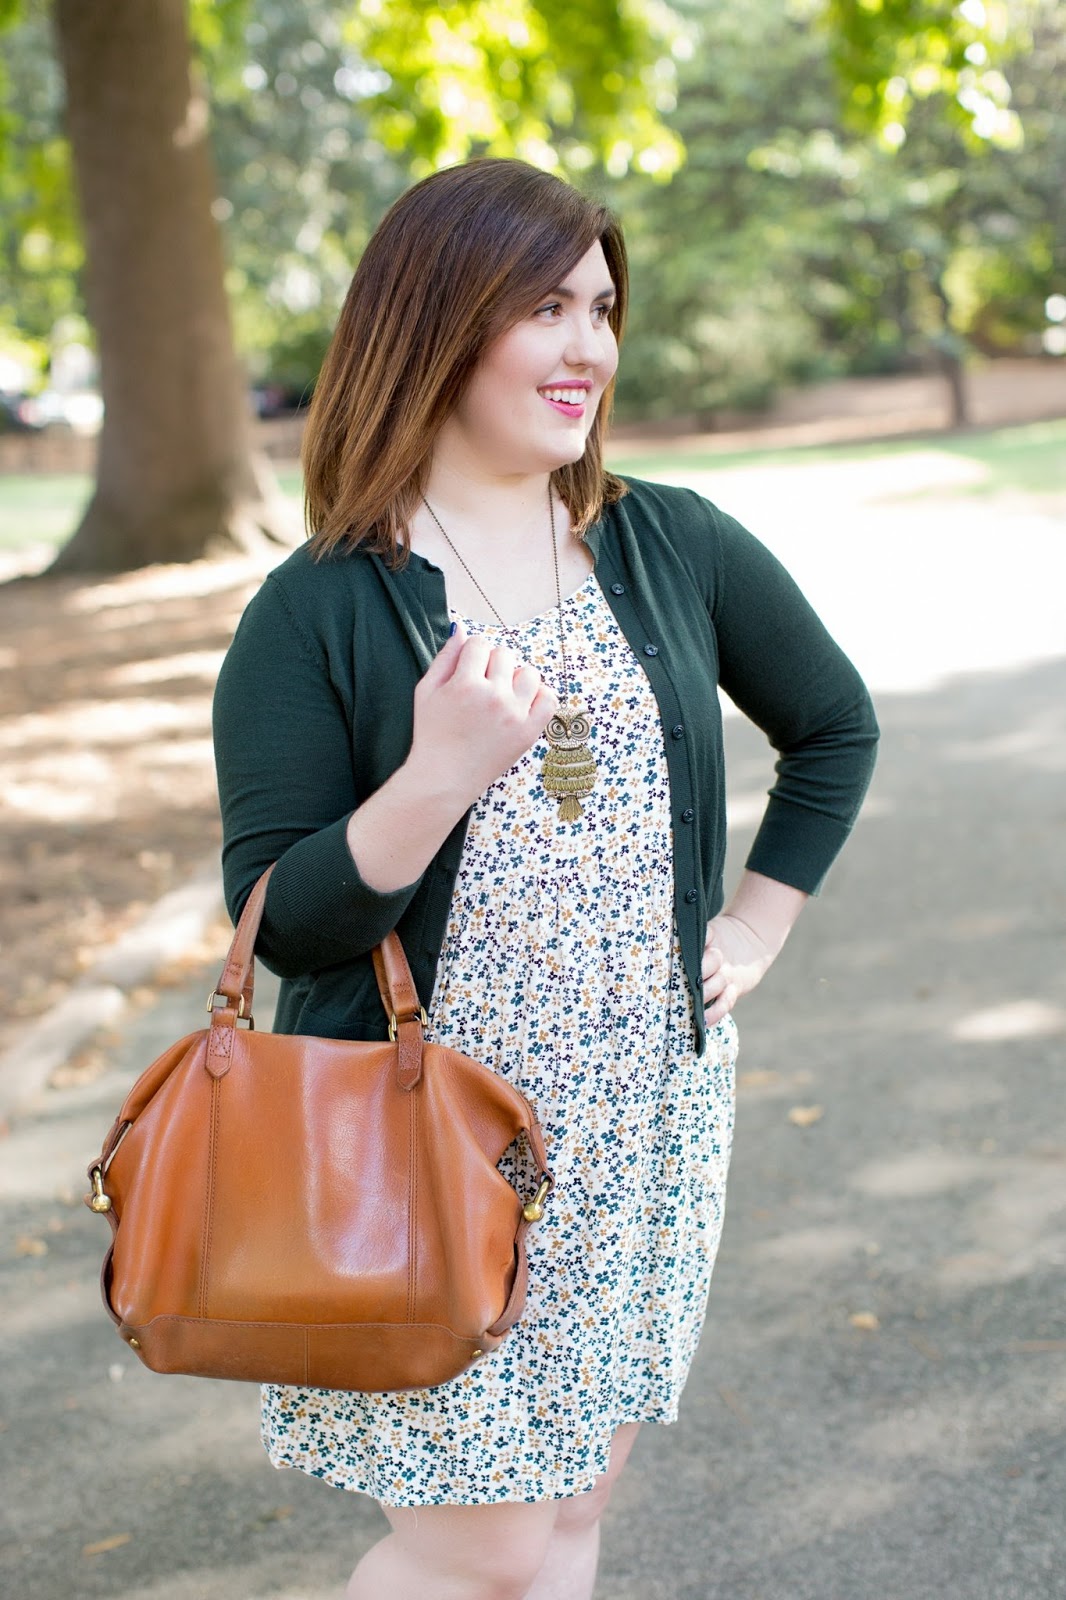 Rebecca Lately Old Navy Floral Dress Loft Cardigan Owl Necklace Madwell Kensington Forever 21 Heels